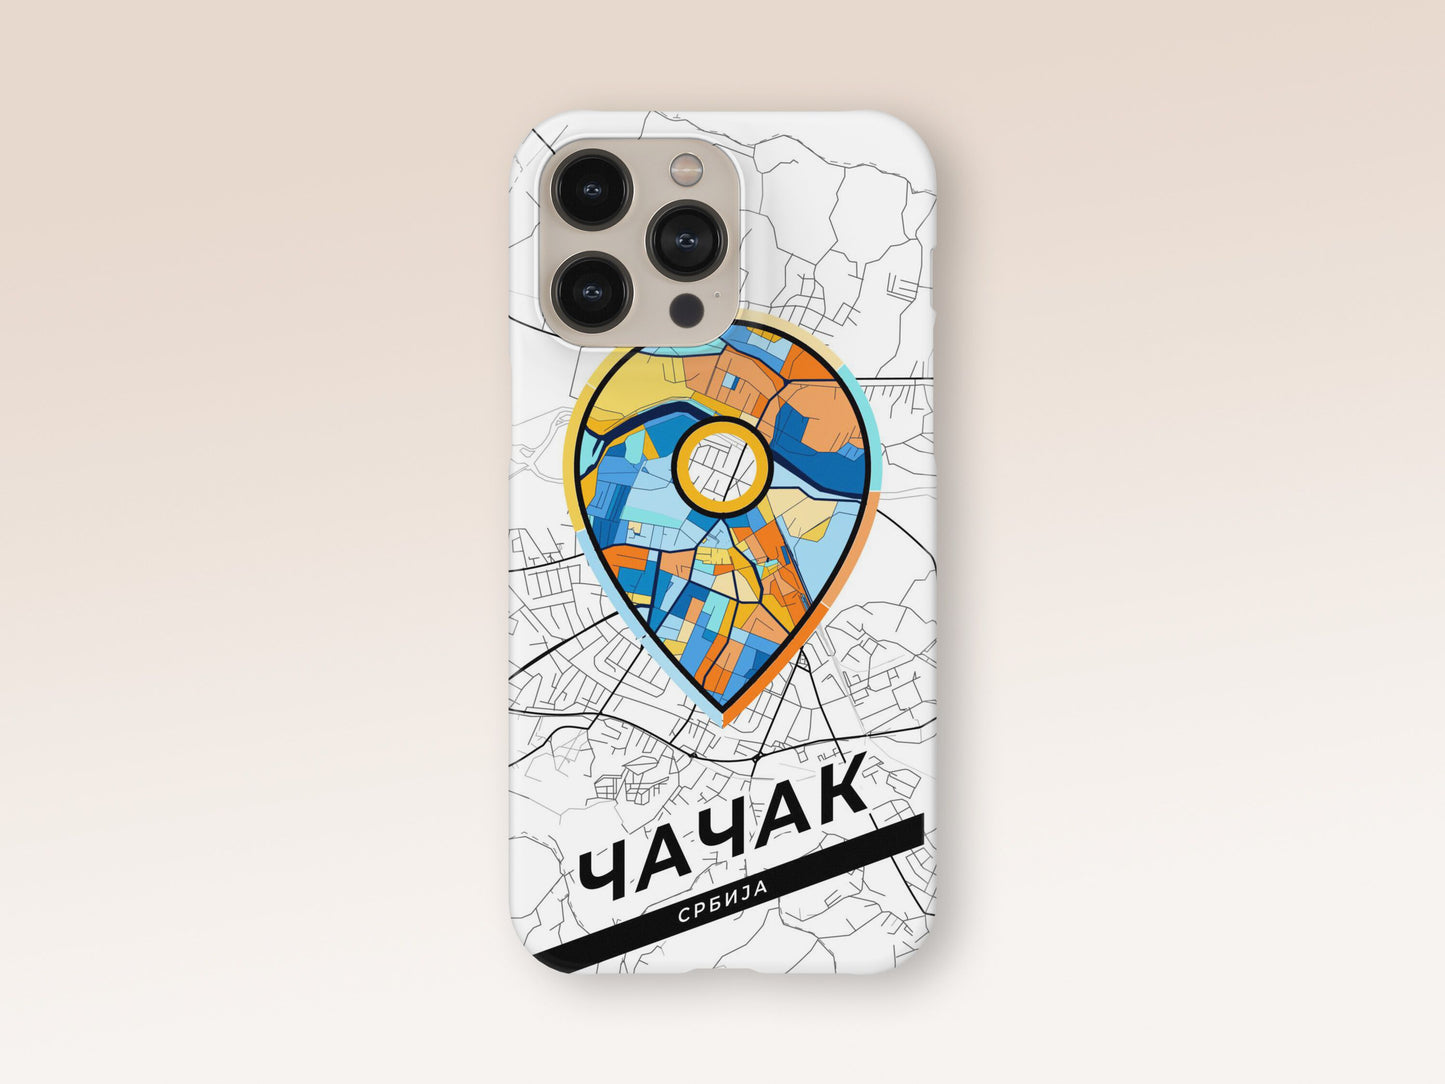 Čačak Serbia slim phone case with colorful icon. Birthday, wedding or housewarming gift. Couple match cases. 1